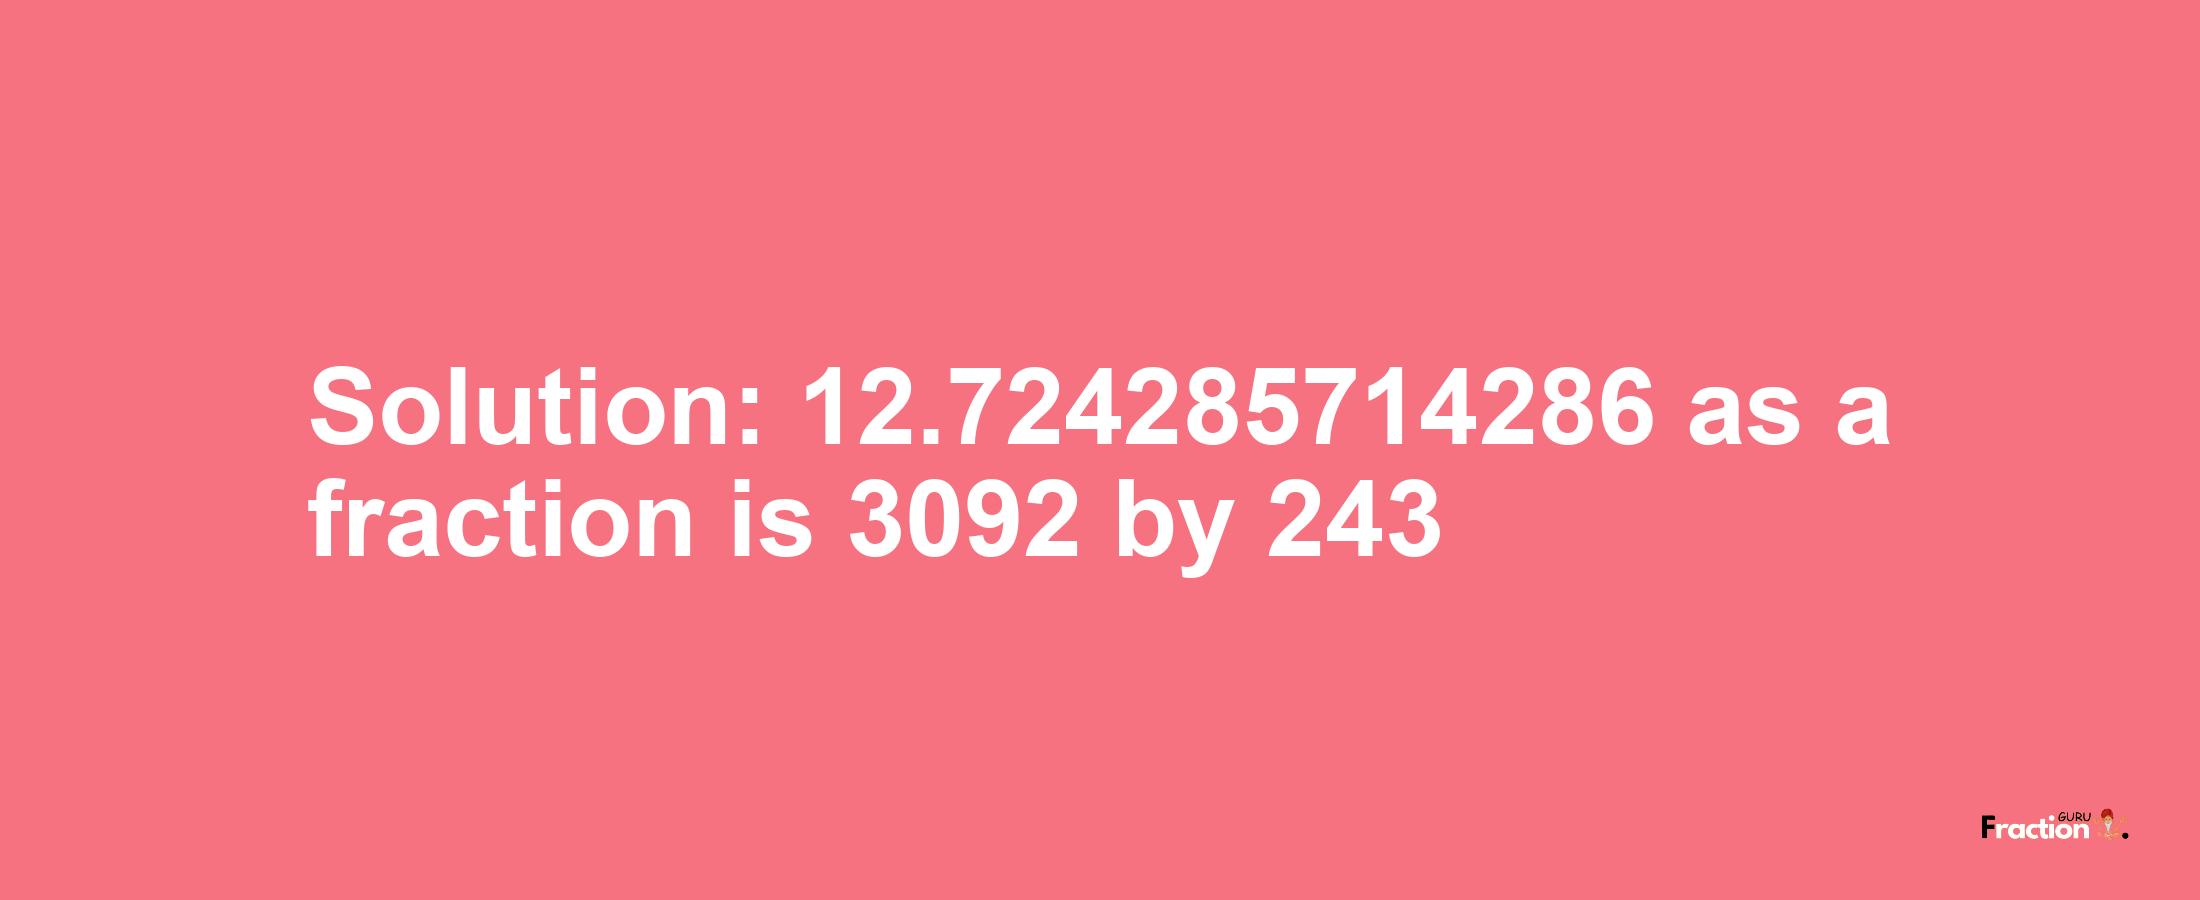 Solution:12.724285714286 as a fraction is 3092/243